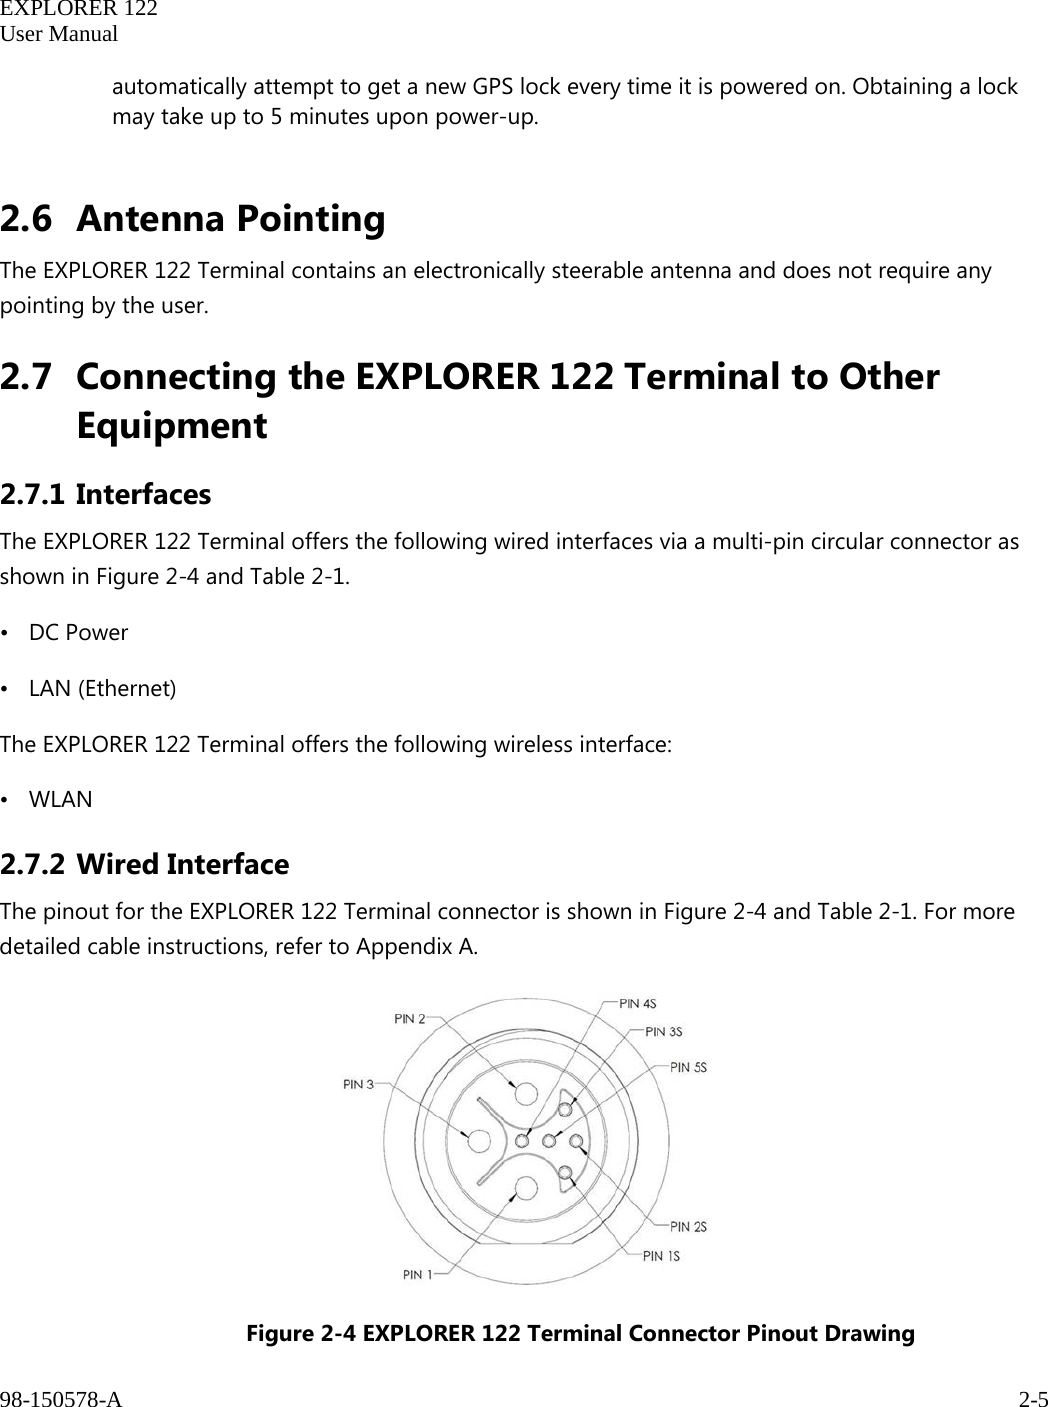   EXPLORER 122  User Manual  98-150578-A     2-5   automatically attempt to get a new GPS lock every time it is powered on. Obtaining a lock may take up to 5 minutes upon power-up.  2.6 Antenna Pointing The EXPLORER 122 Terminal contains an electronically steerable antenna and does not require any pointing by the user. 2.7 Connecting the EXPLORER 122 Terminal to Other Equipment 2.7.1 Interfaces The EXPLORER 122 Terminal offers the following wired interfaces via a multi-pin circular connector as shown in Figure 2-4 and Table 2-1. • DC Power • LAN (Ethernet) The EXPLORER 122 Terminal offers the following wireless interface: • WLAN 2.7.2 Wired Interface The pinout for the EXPLORER 122 Terminal connector is shown in Figure 2-4 and Table 2-1. For more detailed cable instructions, refer to Appendix A.   Figure 2-4 EXPLORER 122 Terminal Connector Pinout Drawing  